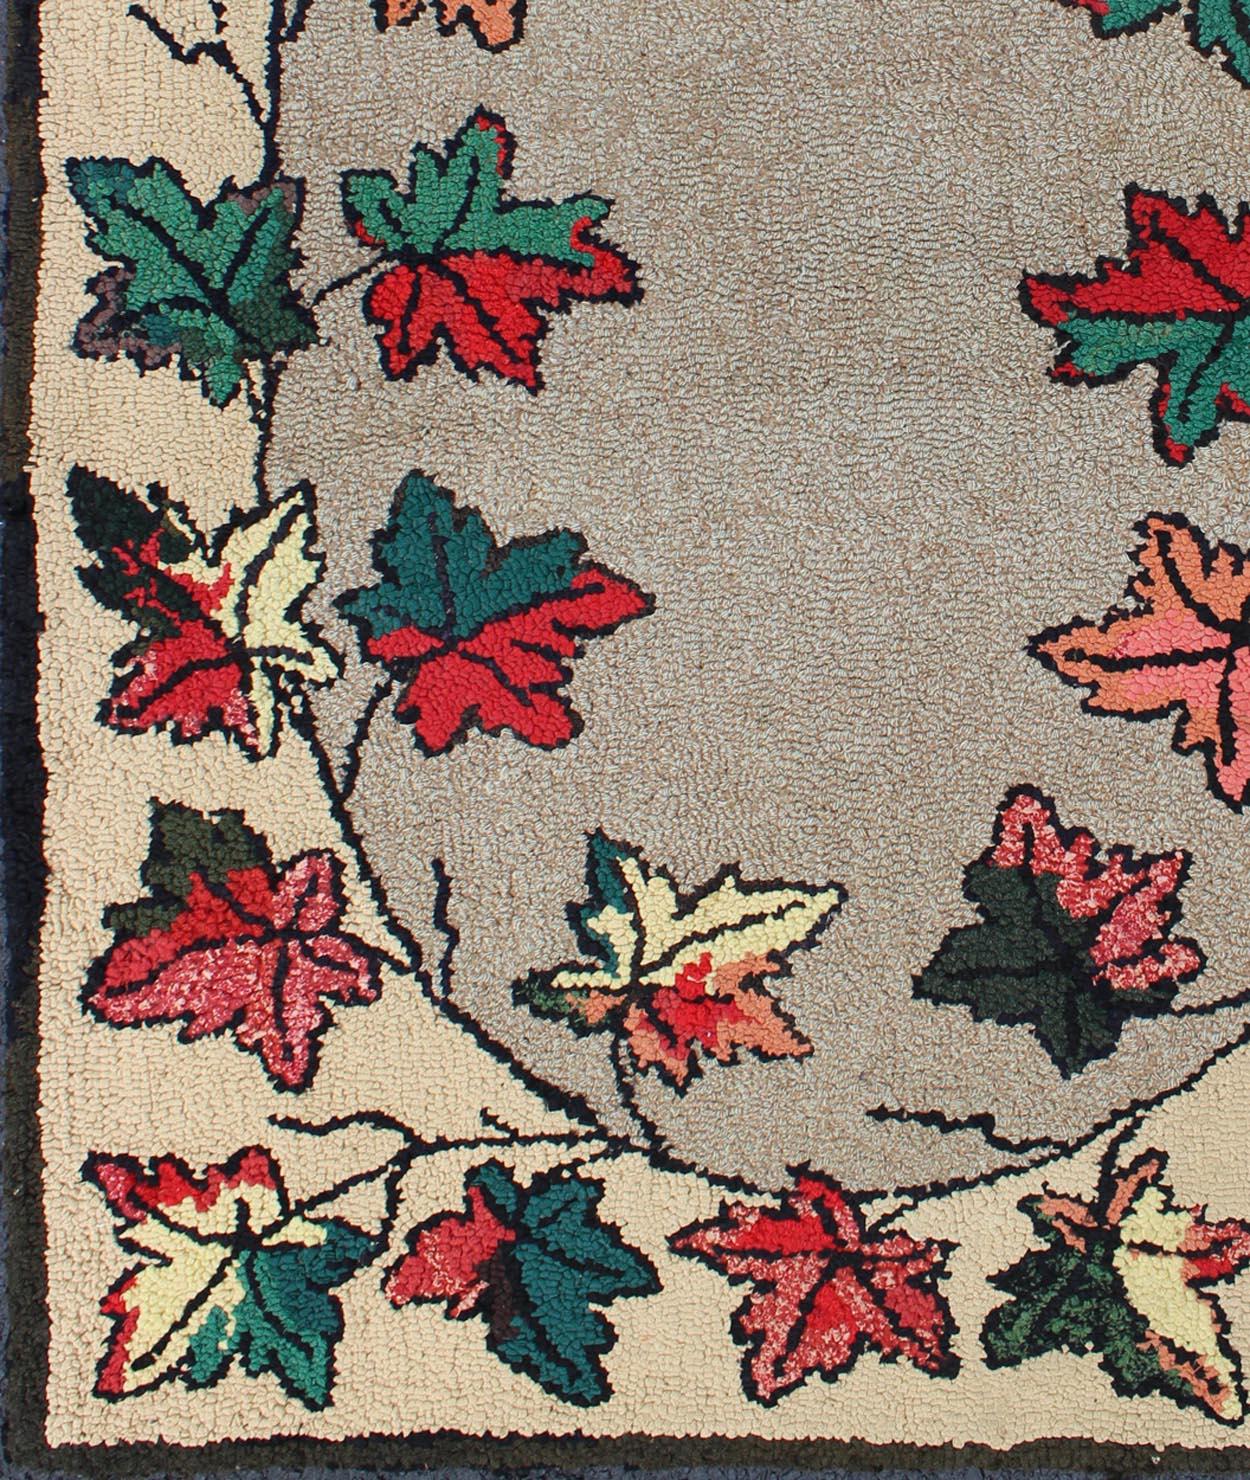 American Colonial Leaf Design American Hooked Rug in Red, Green, and Charcoal Outlines For Sale